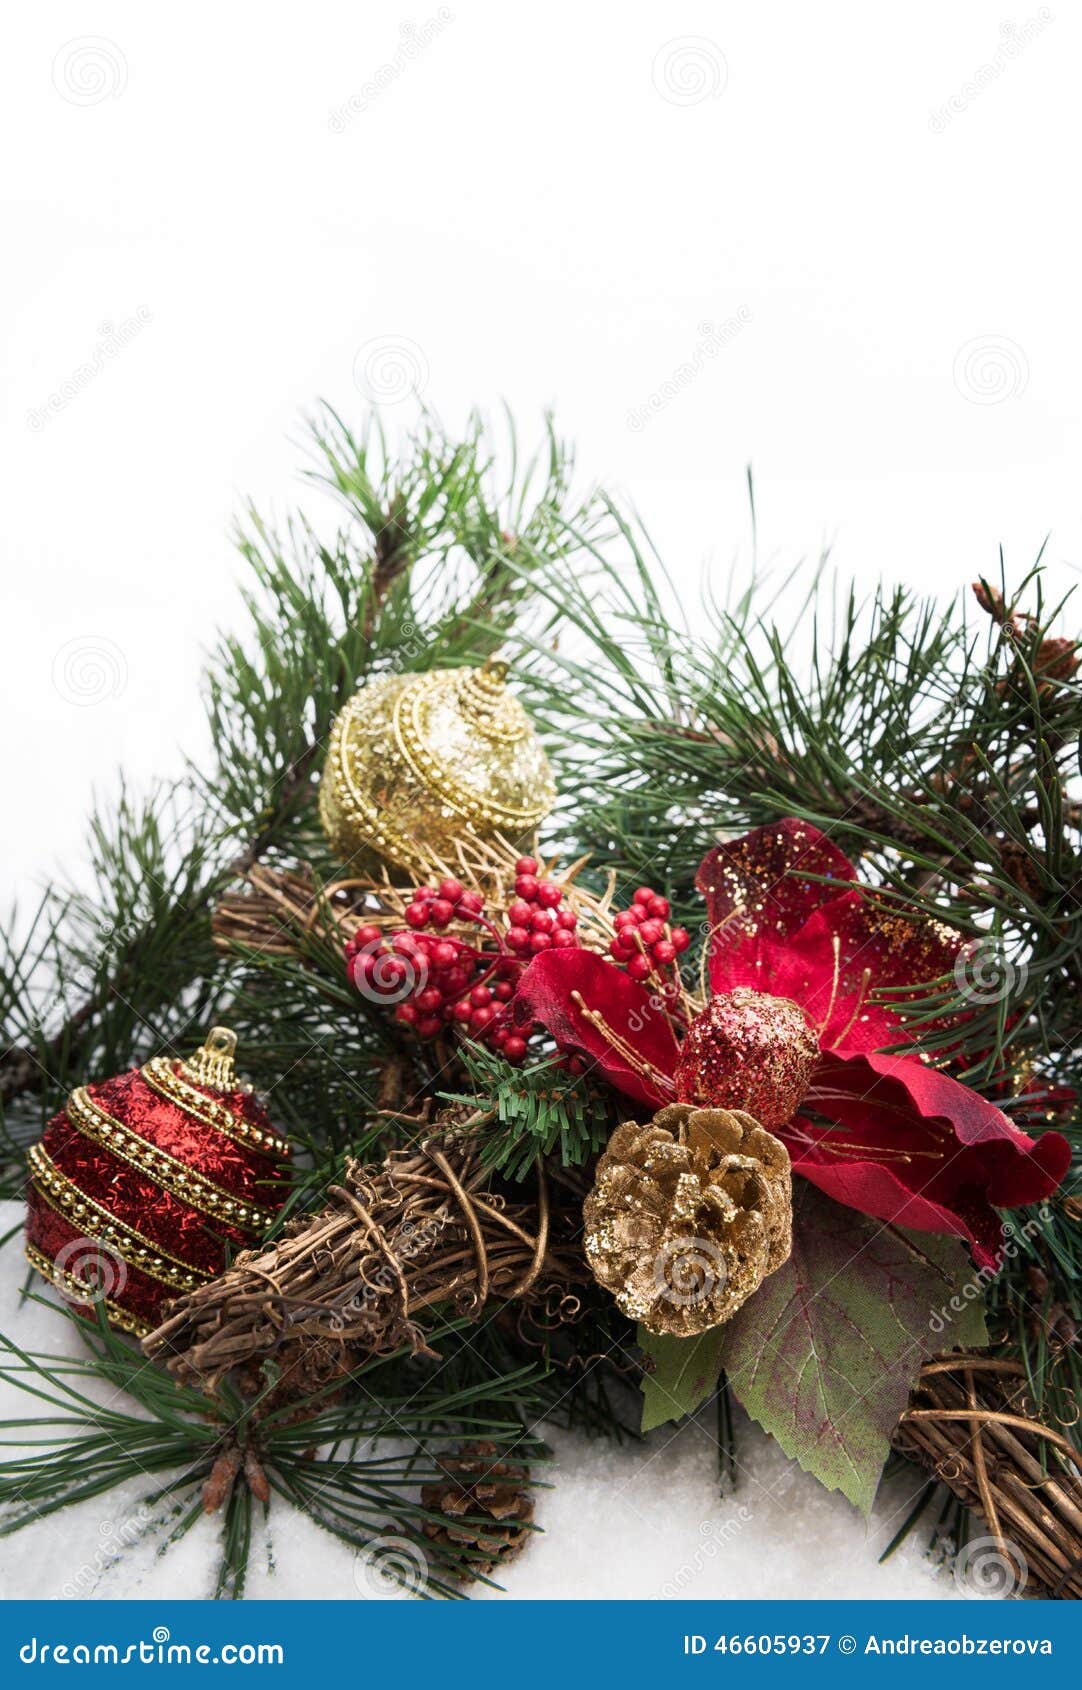 Christmas Background with Pine Tree Branch, Pine Cones, Red Flower in ...